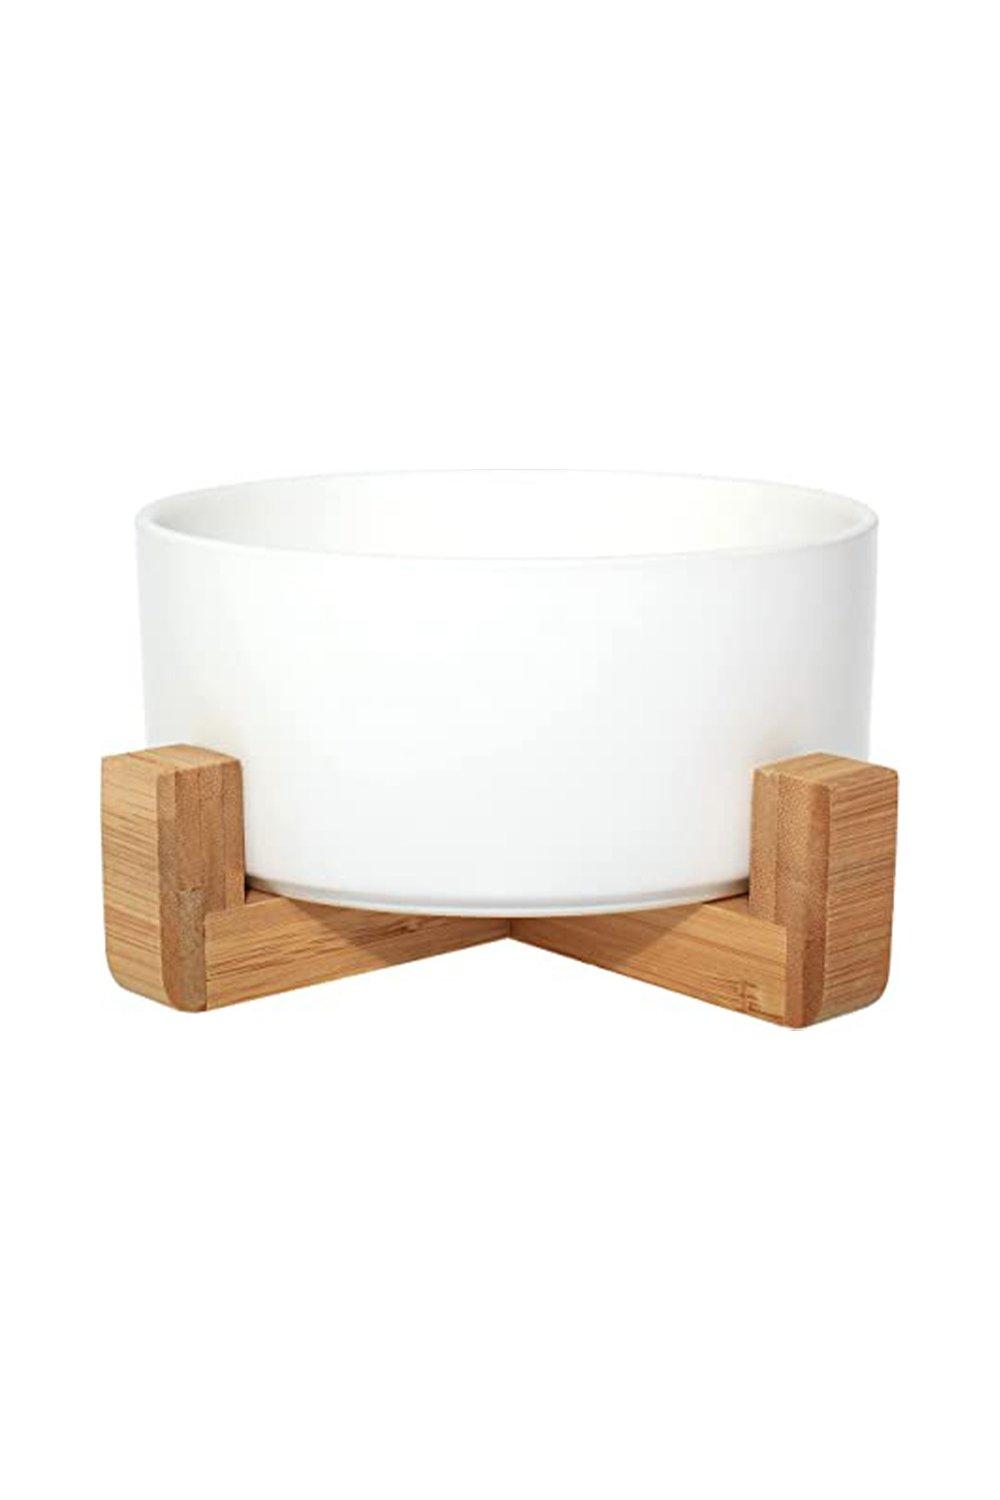 pet wiz Ceramic Bowl with Bamboo Stand for Dogs & Cats